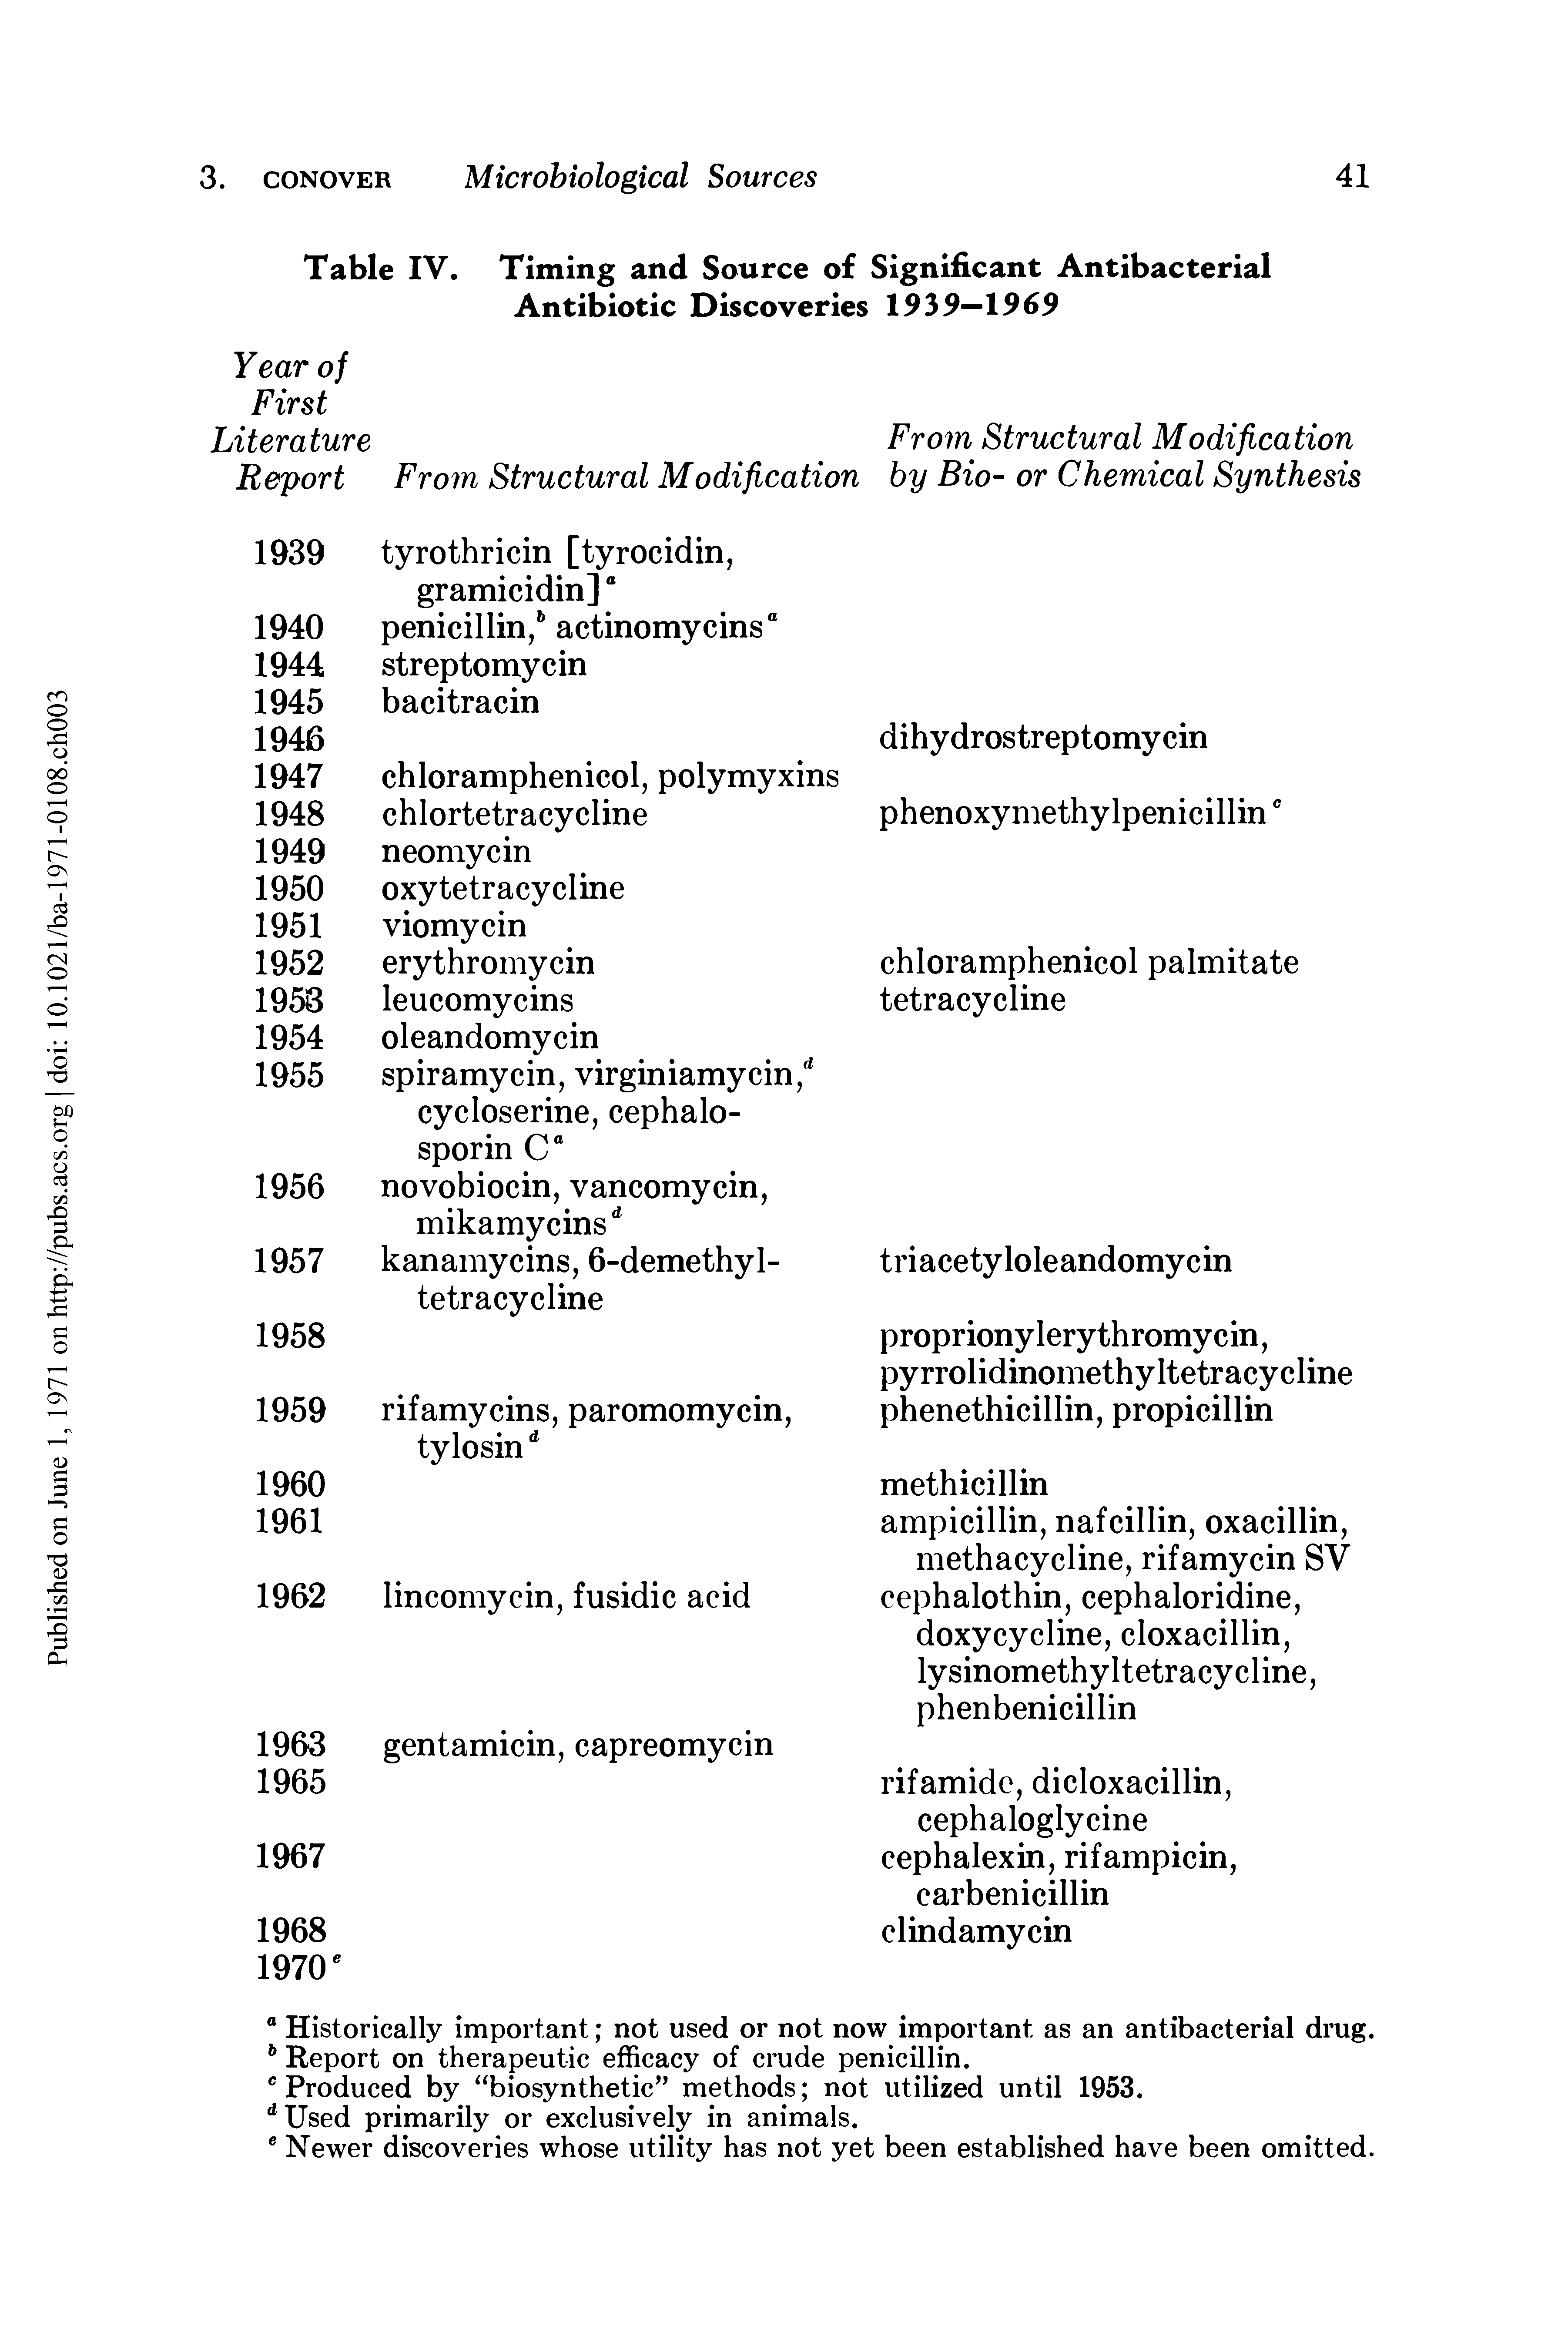 Table IV. Timing and Source of Significant Antibacterial Antibiotic Discoveries 1939—1969...